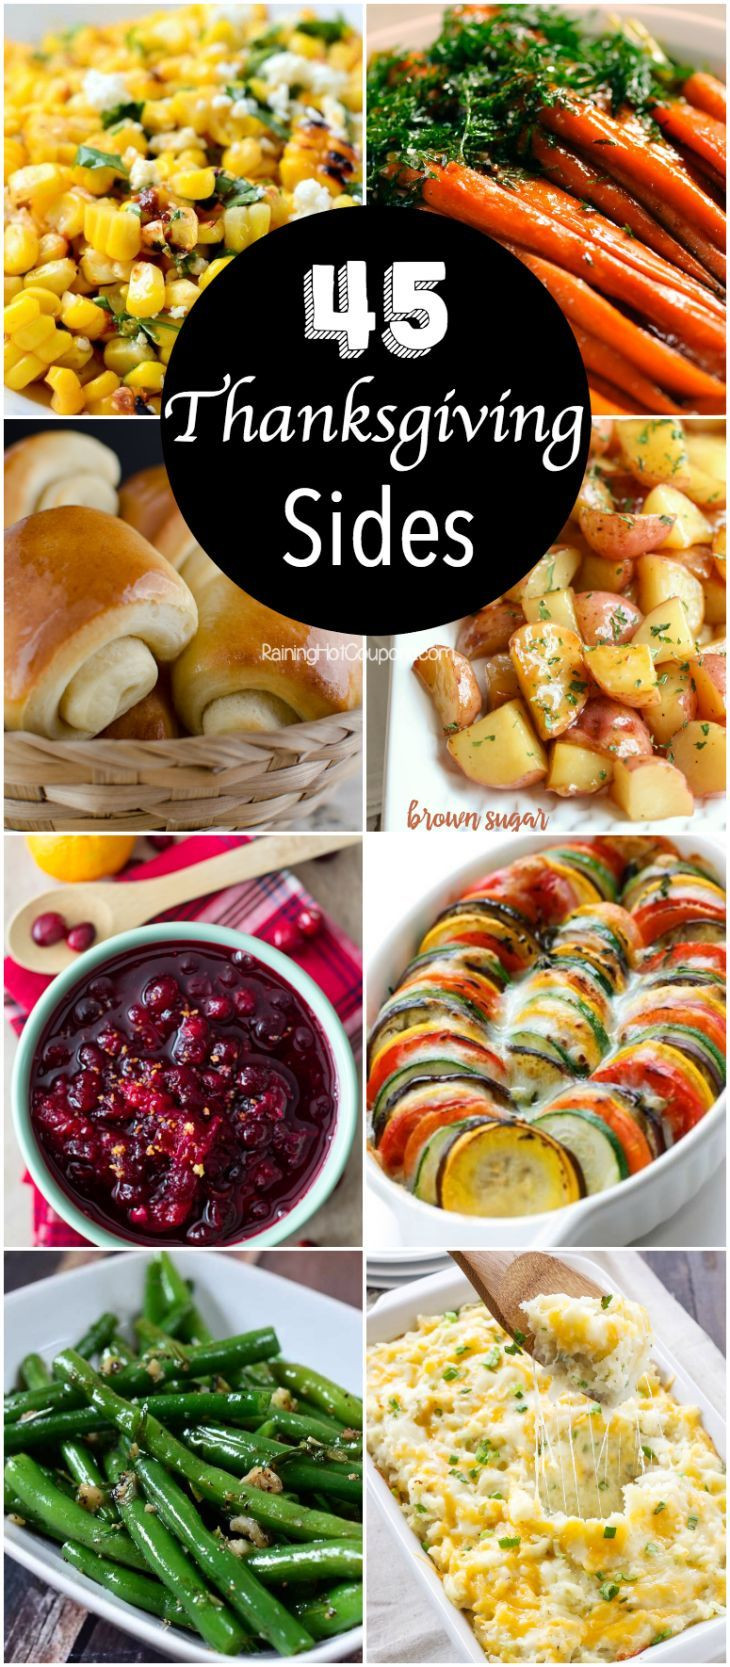 Thanksgiving Side Dishes Pinterest
 45 Thanksgiving Side Dishes